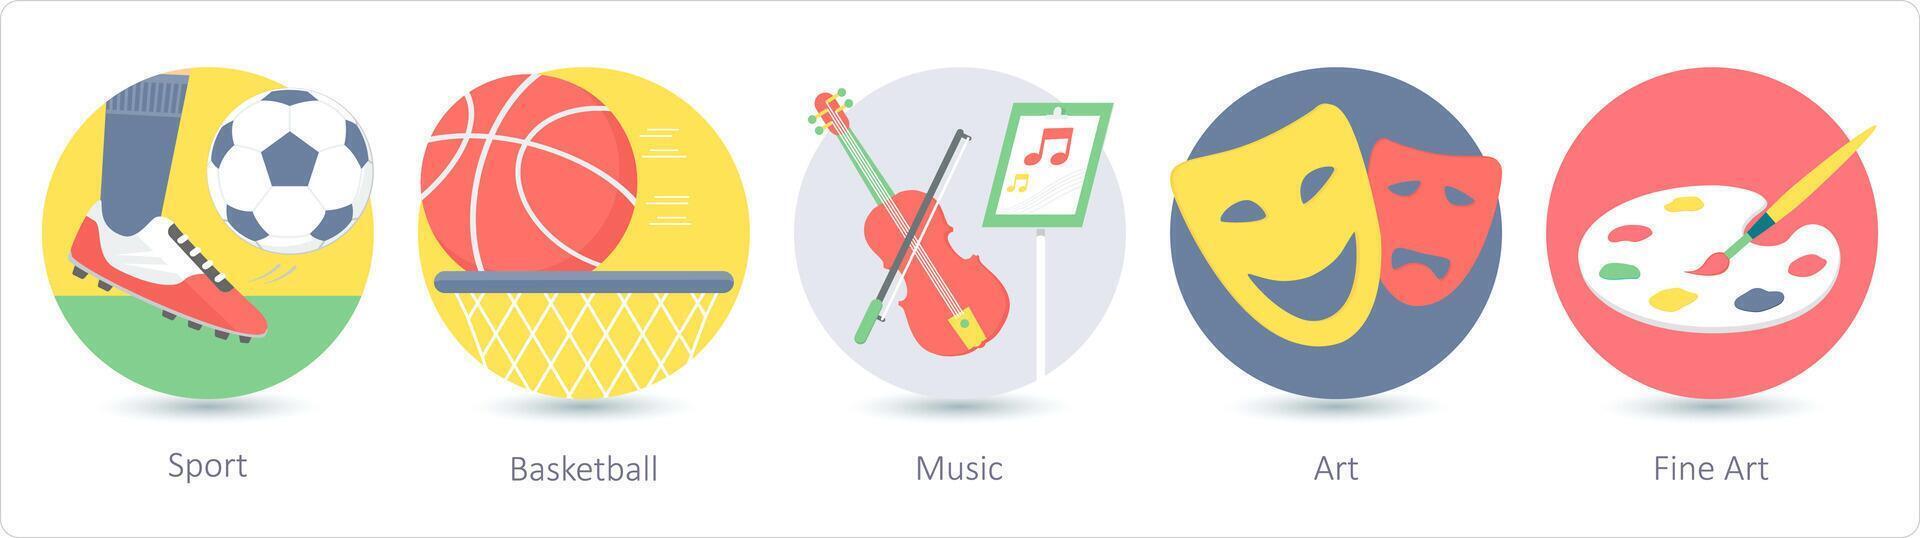 A set of 5 education icons as sport, basketball, music vector